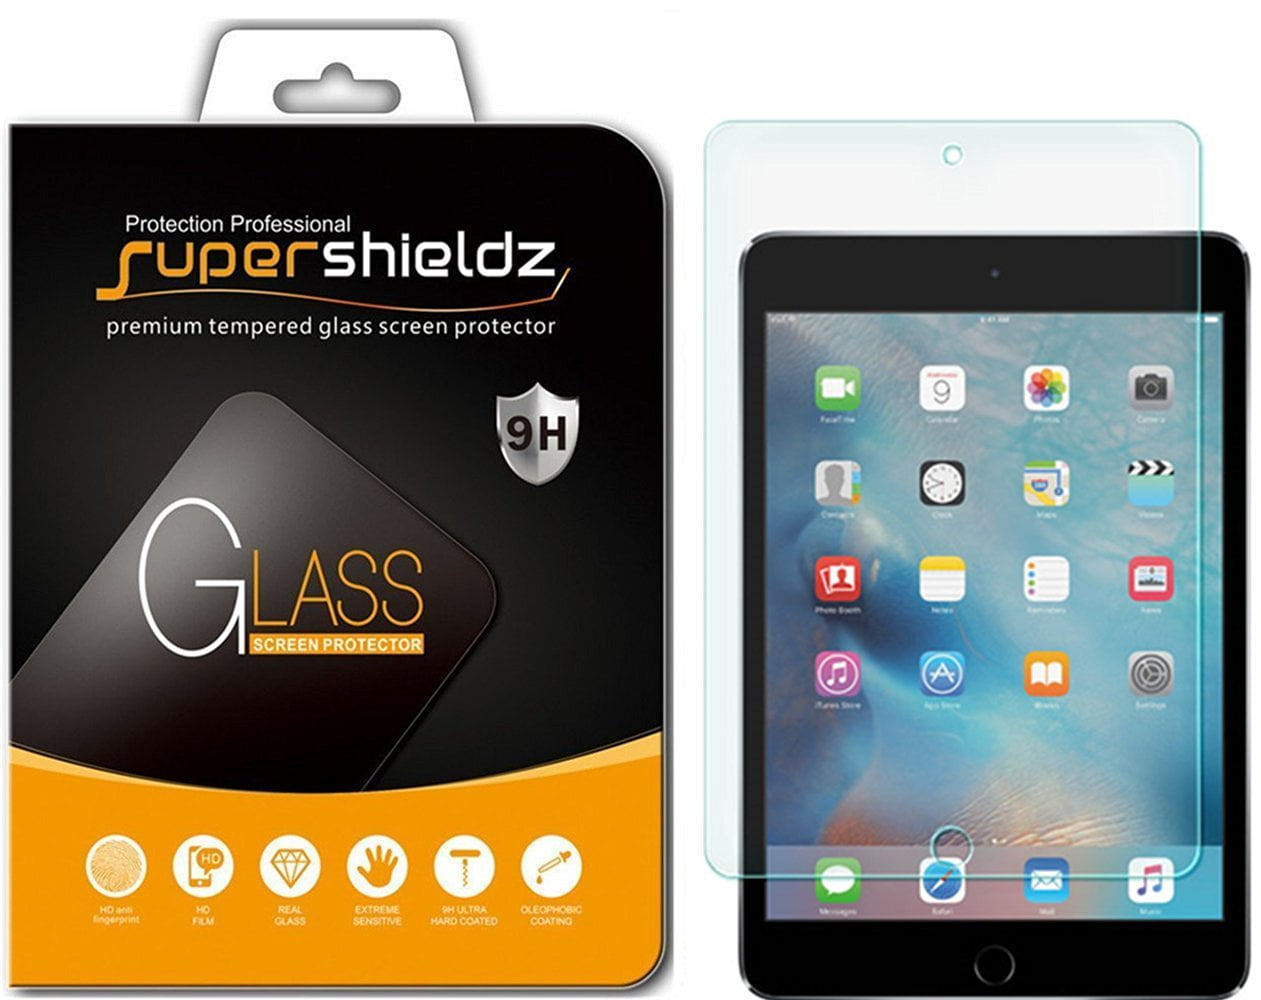 100% Genuine Tempered Glass Screen Protector cover For Apple Ipad mini 1,2,3 